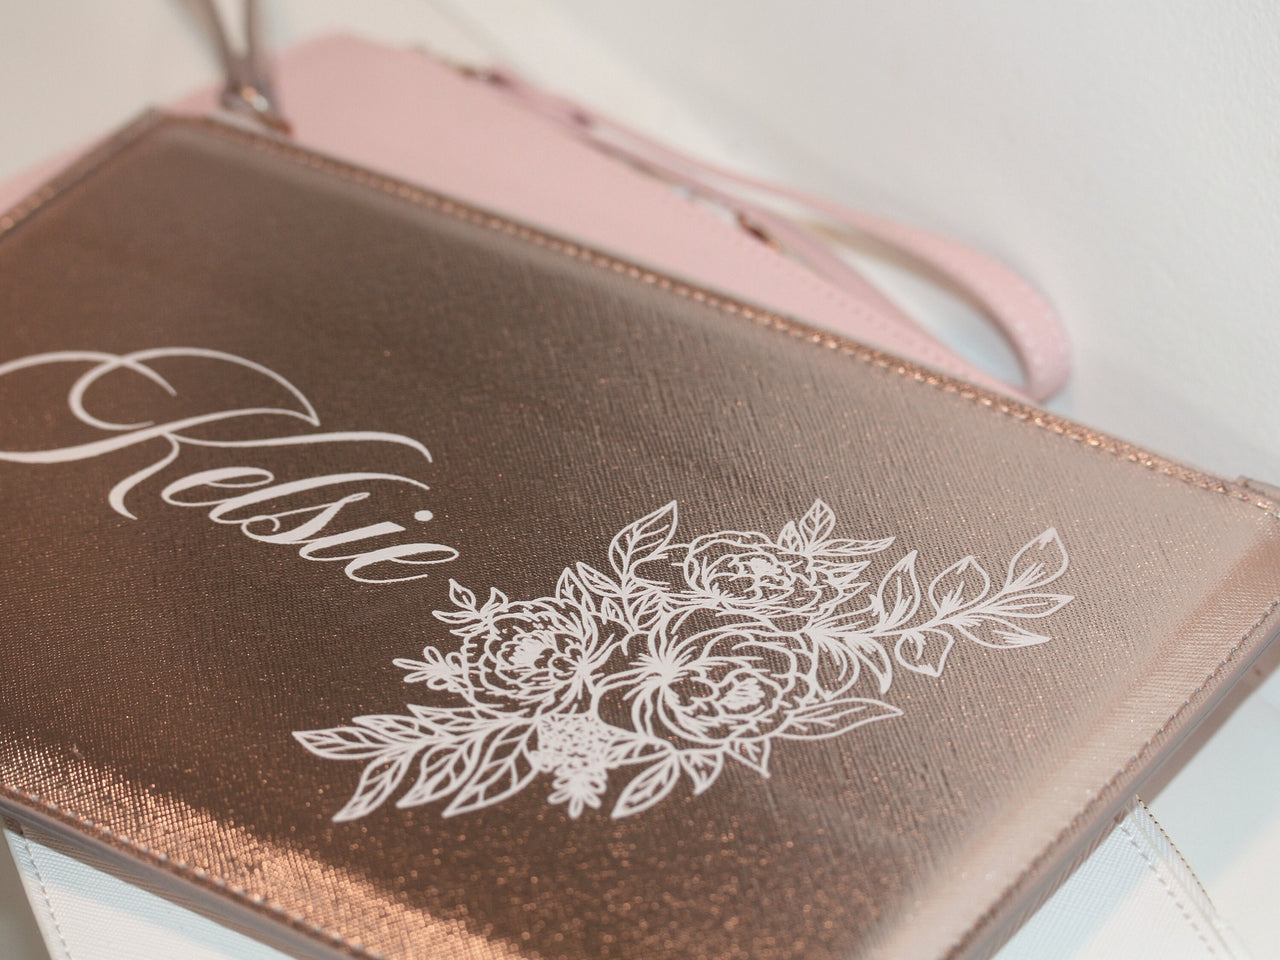 Personalized Vegan Leather Wristlet, Floral Name clutch rose gold bag Bridesmaids Gifts, Bridal Party Bags pleather envelope evening bag